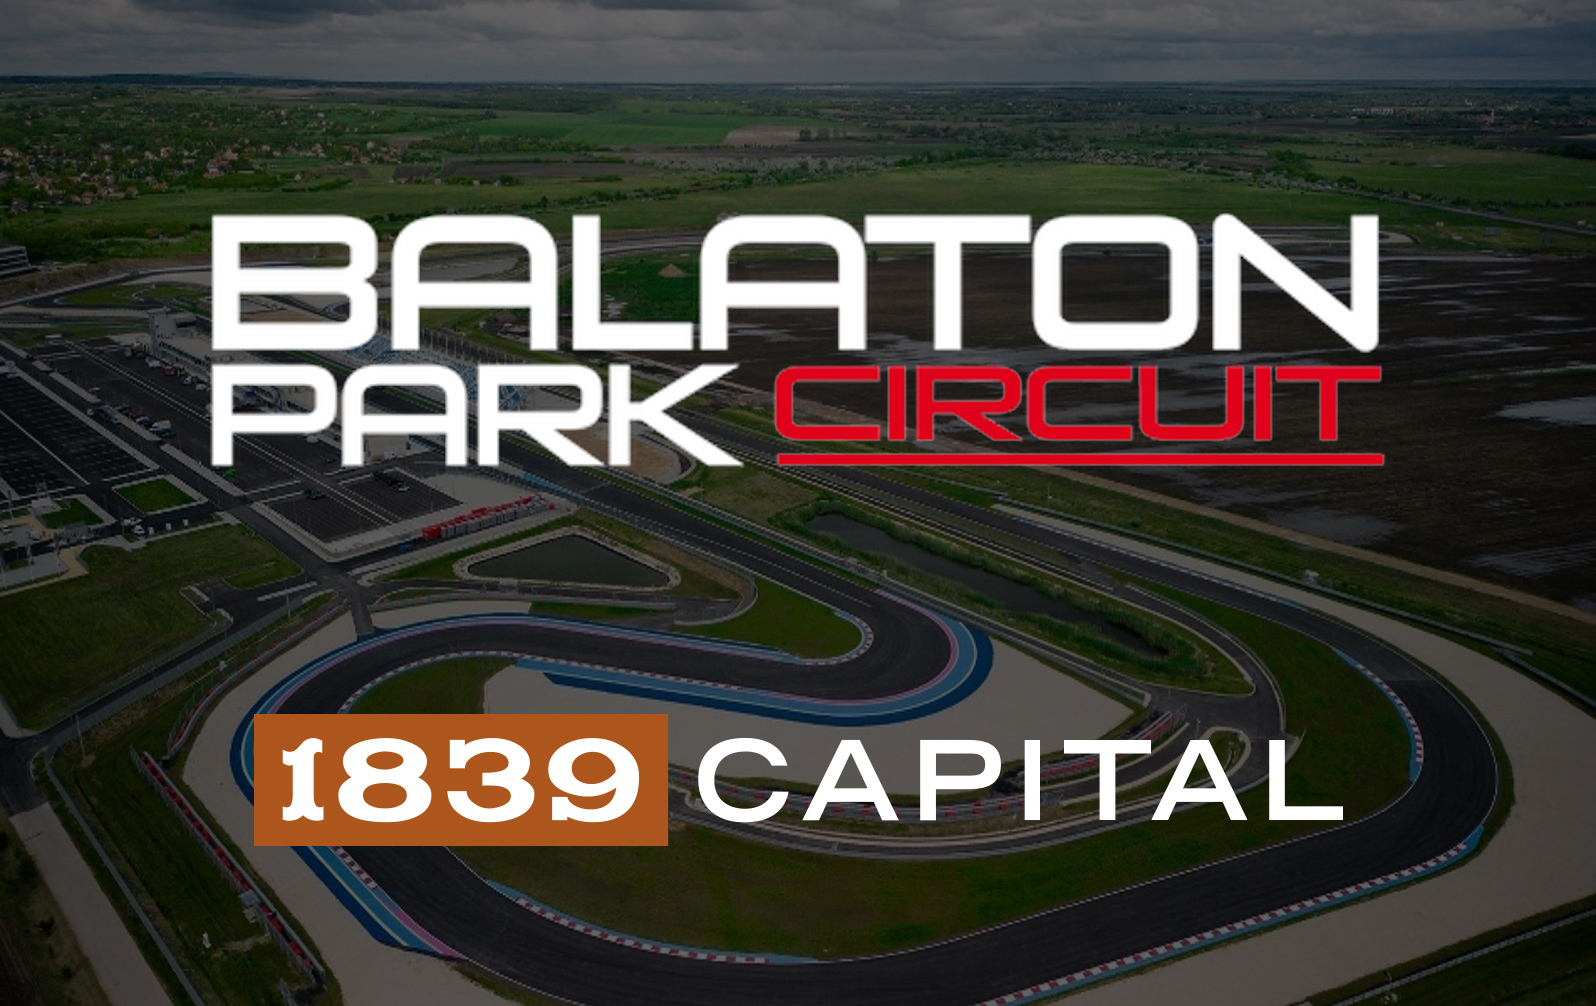 1839 CAPITAL, A PROUD PARTNER IN THE BALATON PARK CIRCUIT, IS PLEASED TO ANNOUNCE THE WORLD’S NEWEST AND MOST TECHNOLOGICALLY ADVANCED SPEEDWAY IS NOW OPEN.